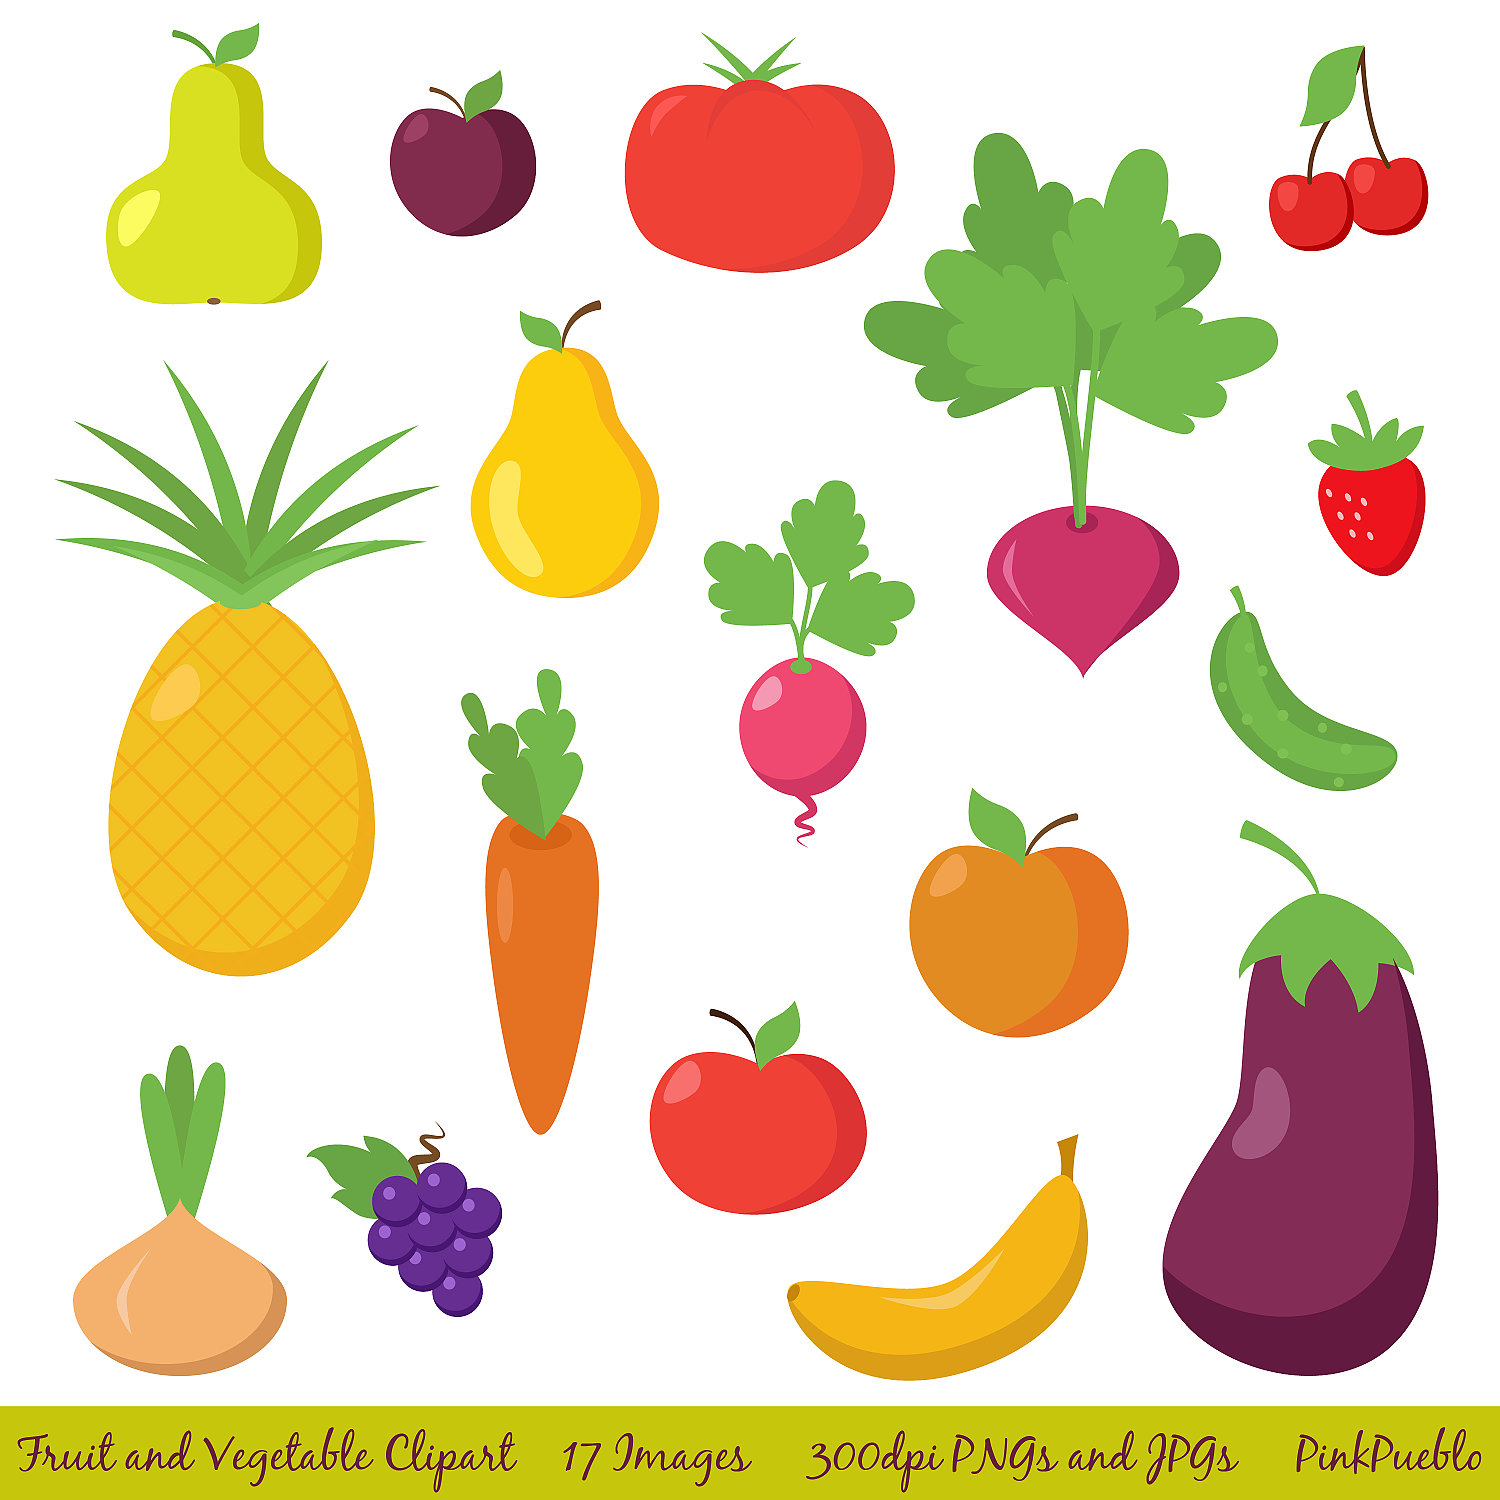 Fruit and Vegetable Clipart C - Vegetable Clipart